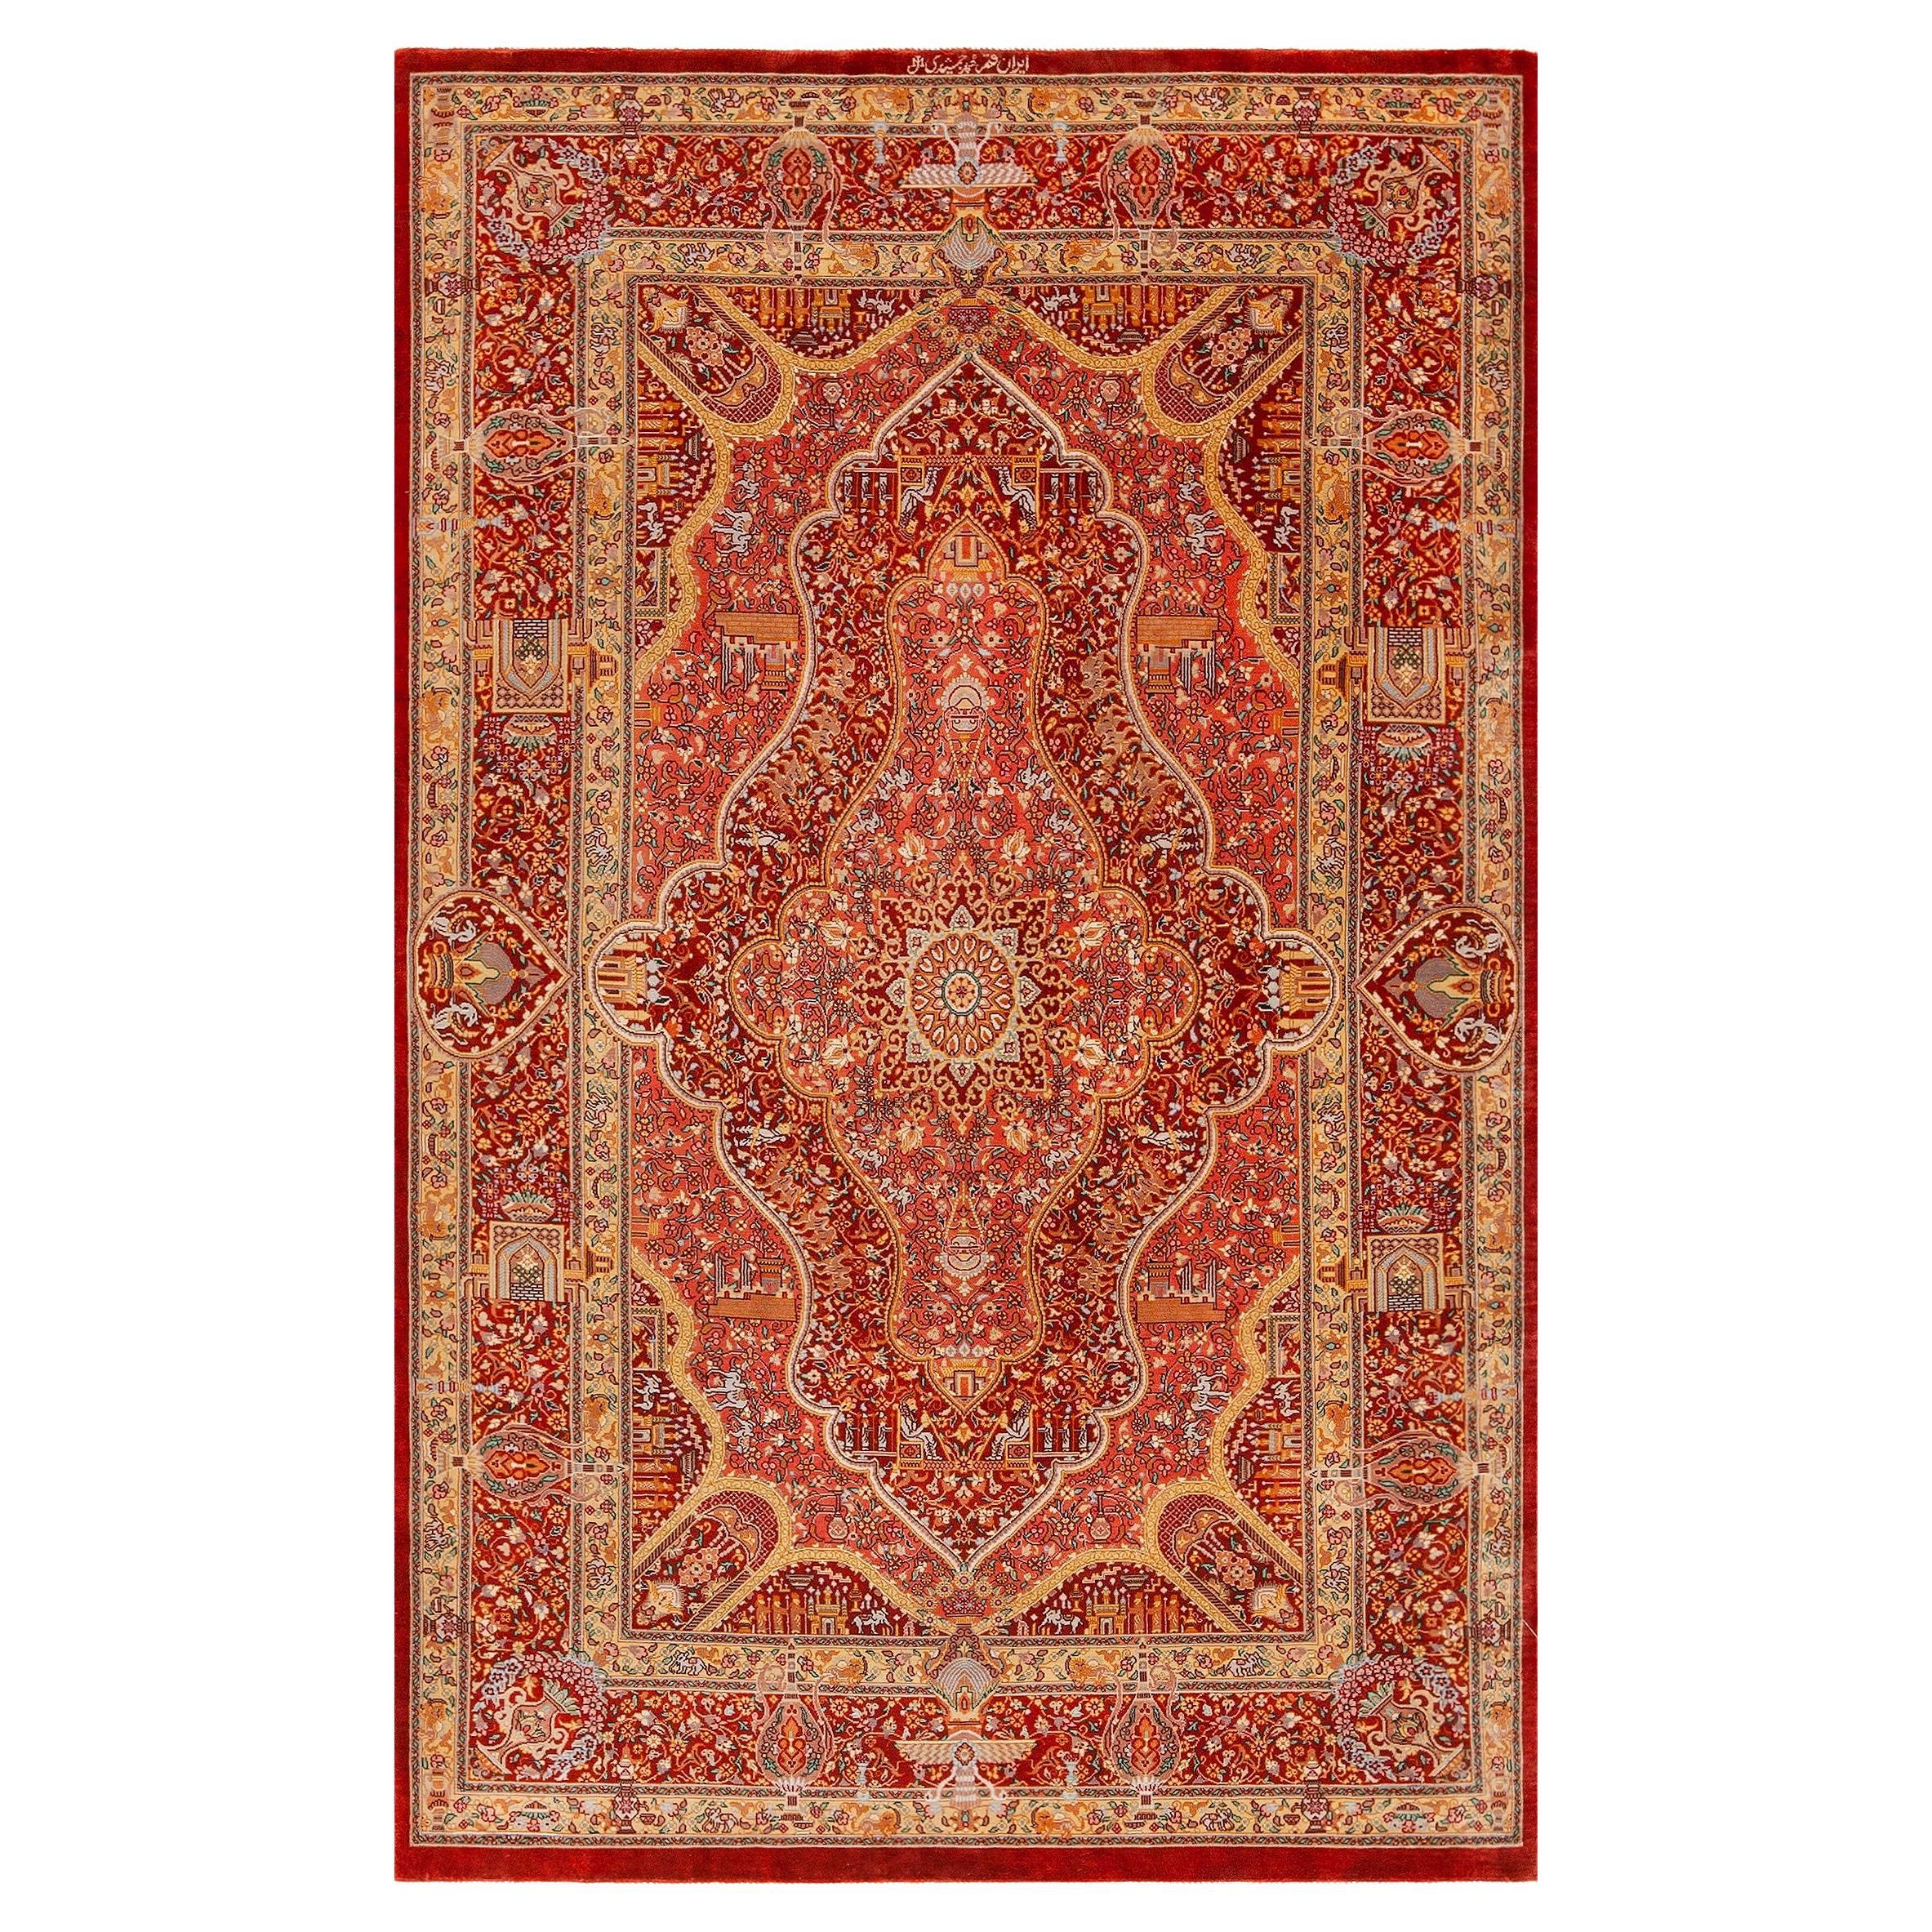 Small Fine Luxurious Silk Pile Vintage Persian Animal Qum Rug 3'3" x 5'1" For Sale